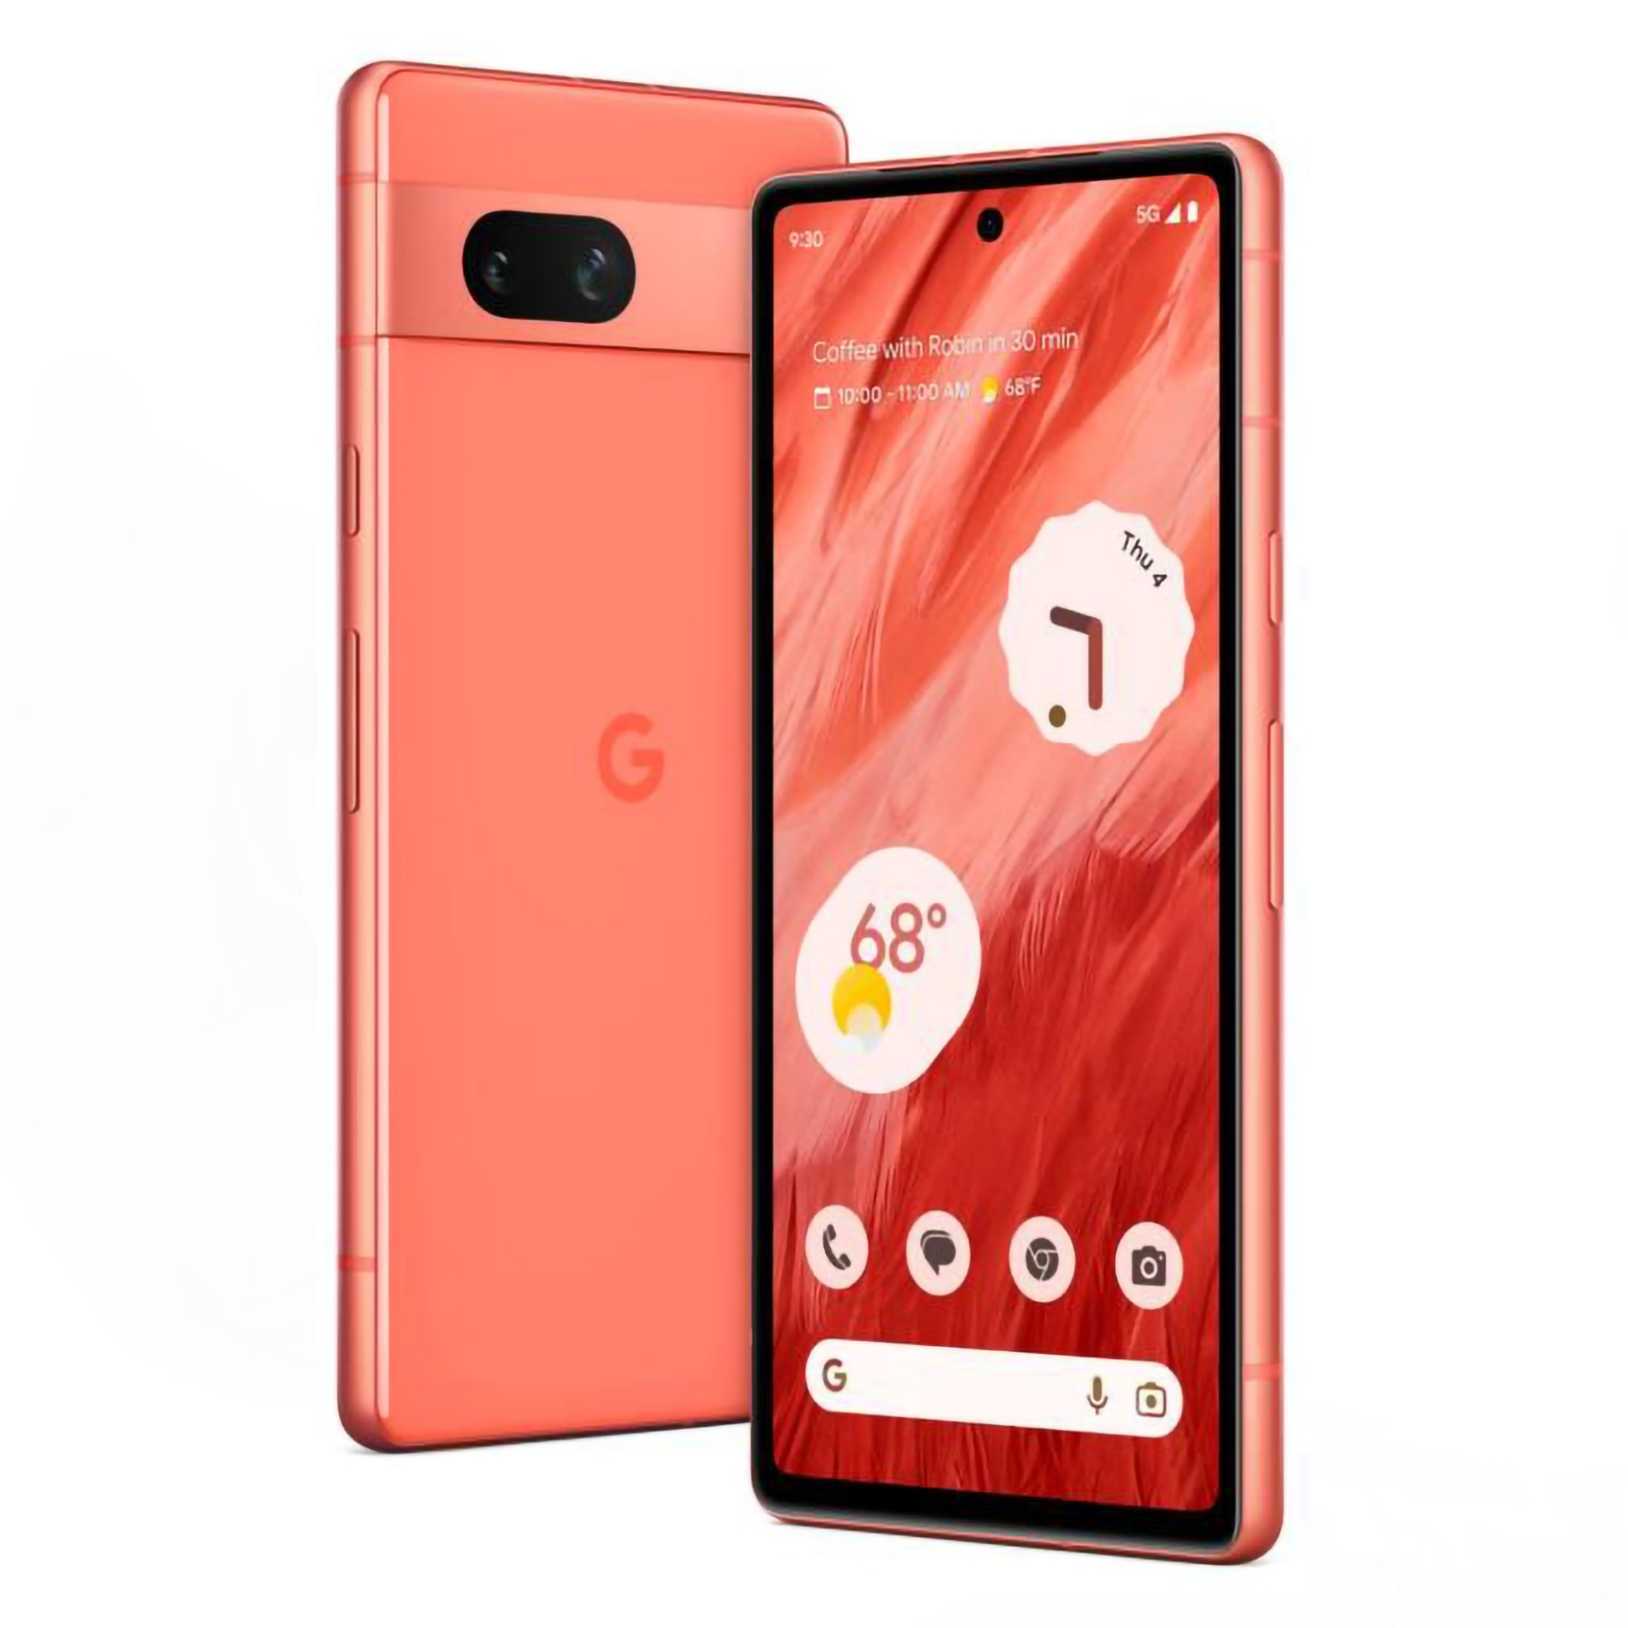 Official render of the Pixel 7a in Coral